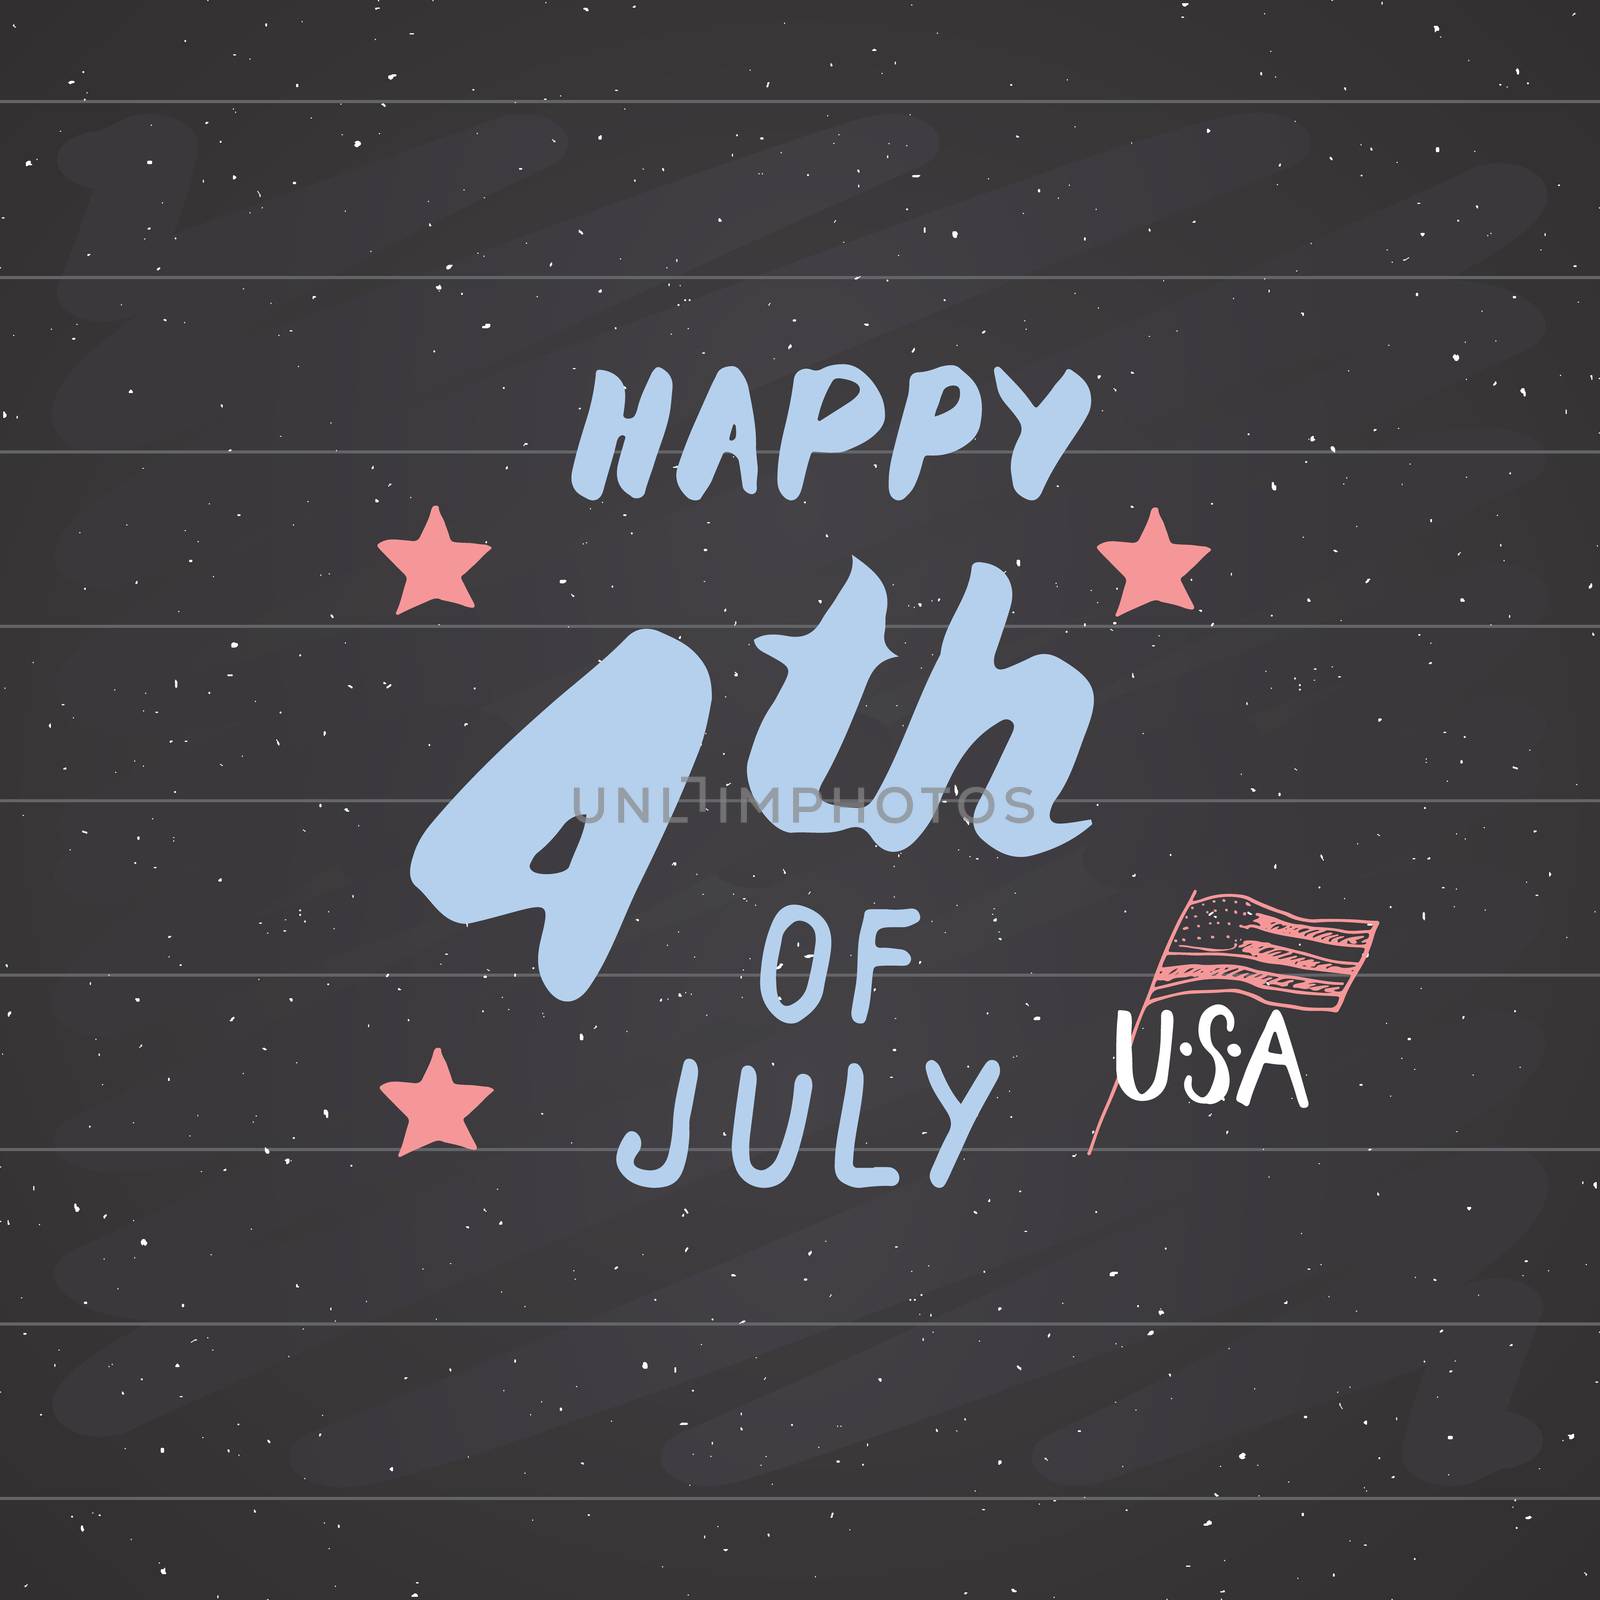 Happy Independence Day, fourth of july, Vintage USA greeting card, United States of America celebration. Hand lettering, american holiday grunge textured retro design vector illustration on chalkboard. by Lemon_workshop